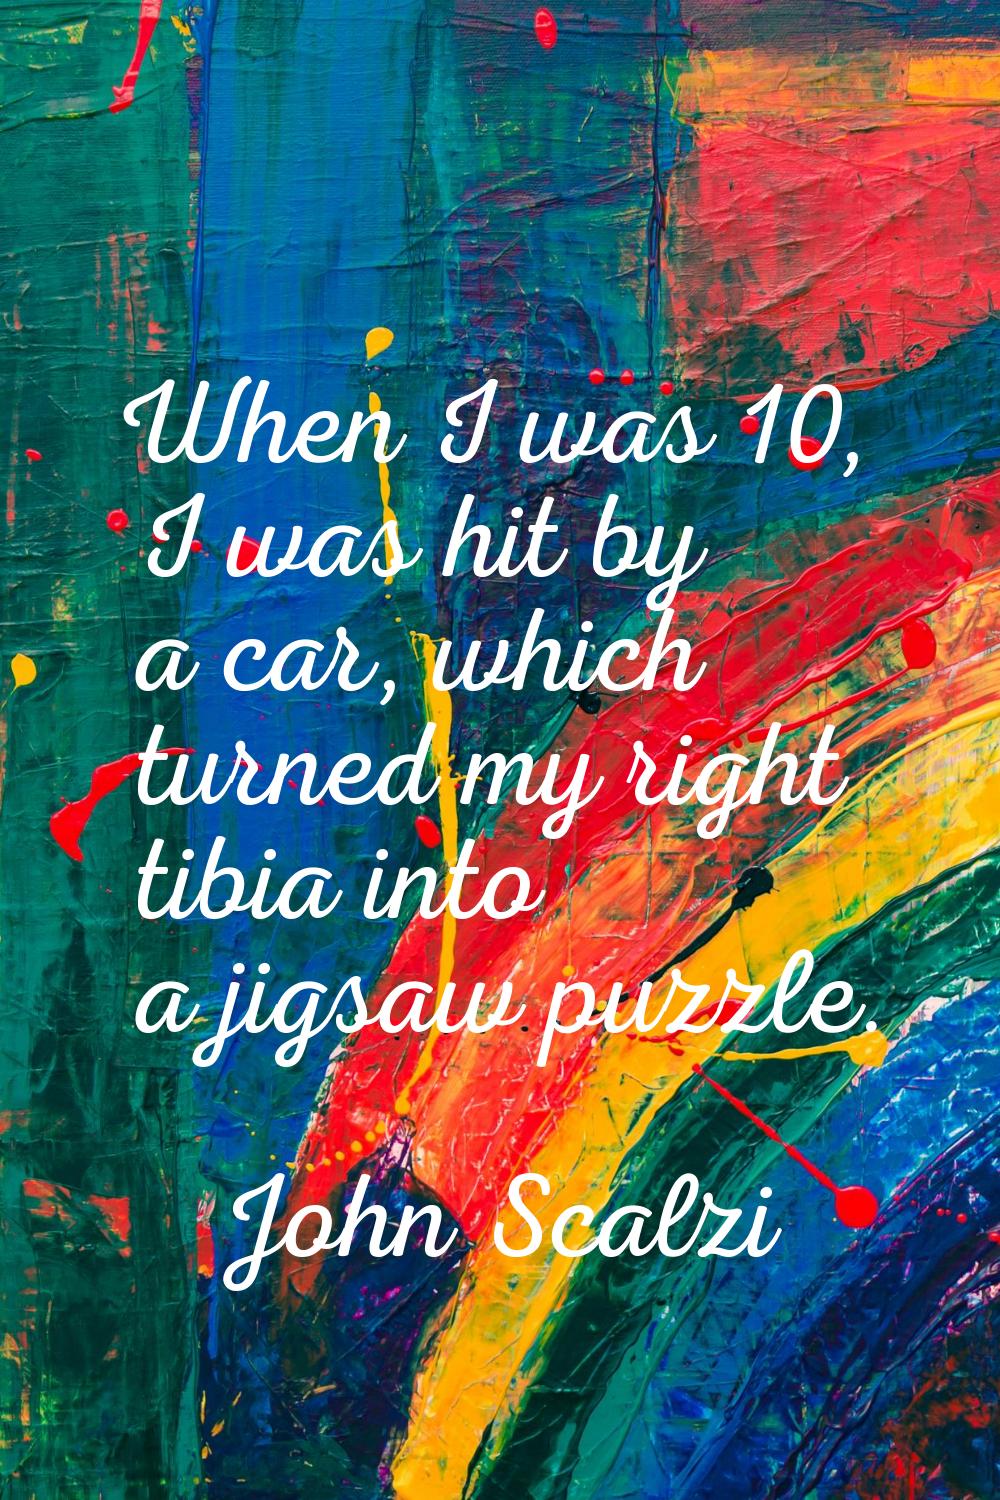 When I was 10, I was hit by a car, which turned my right tibia into a jigsaw puzzle.